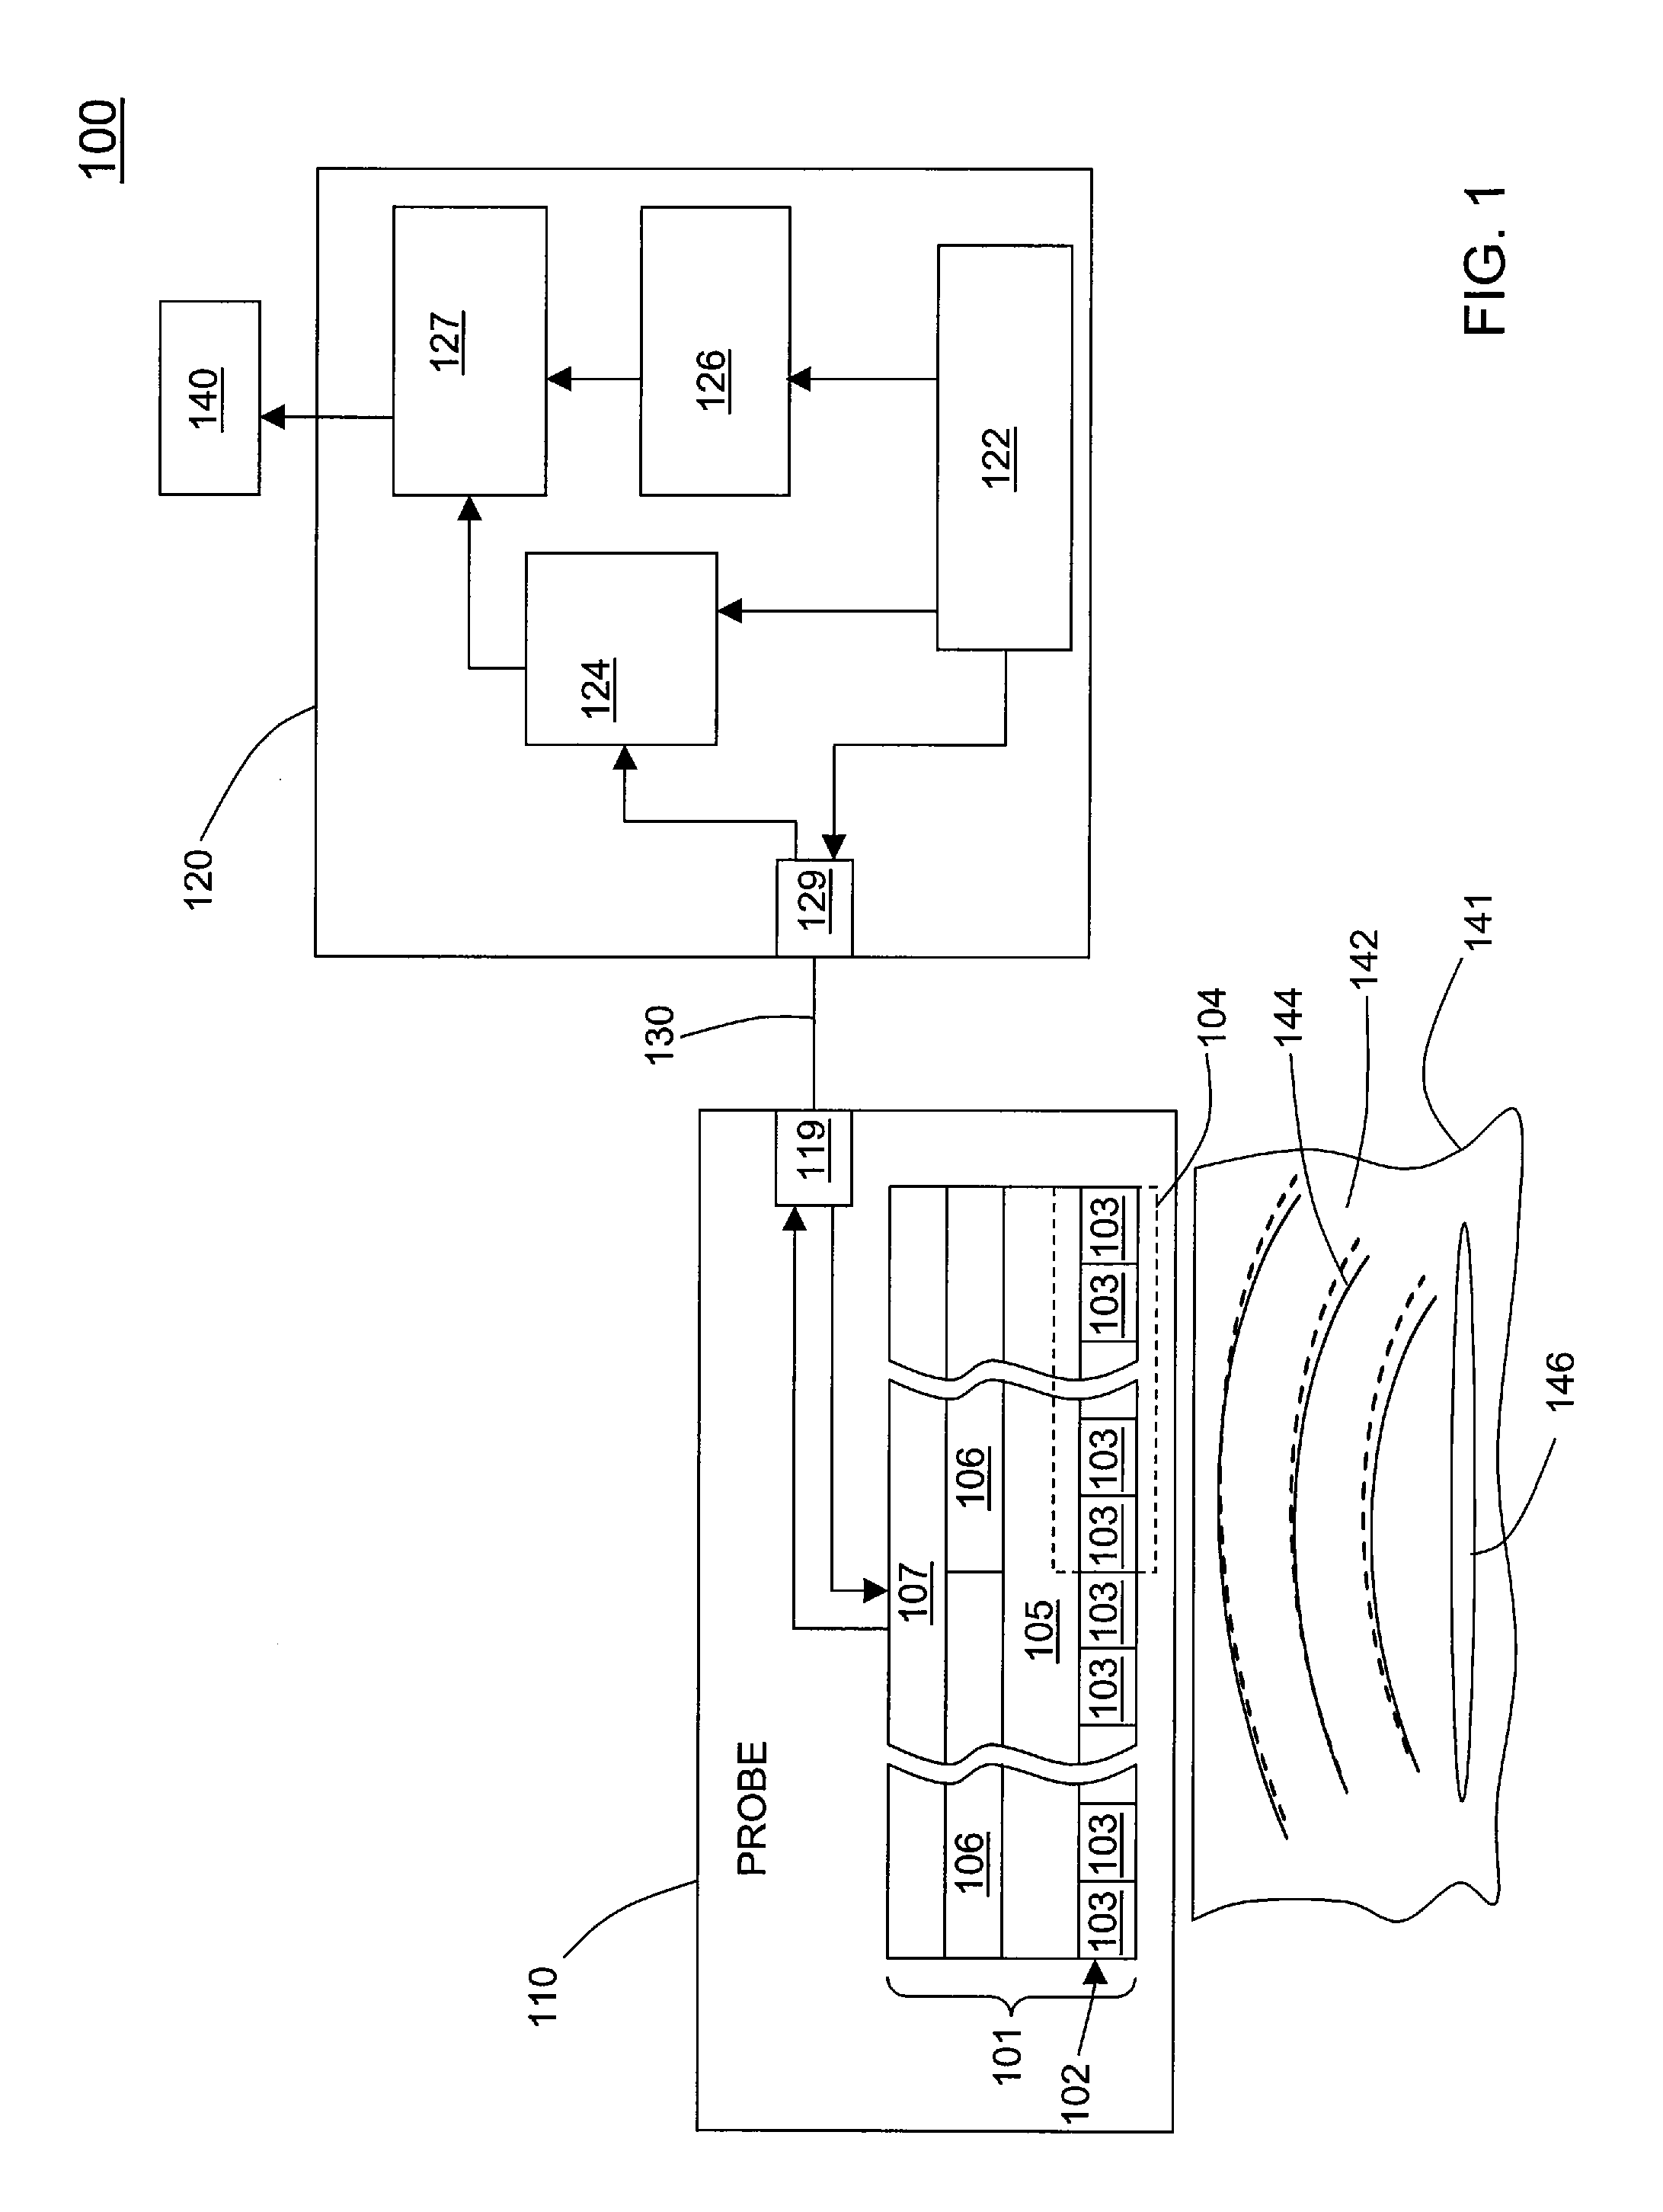 Monitoring or imaging system with interconnect structure for large area sensor array